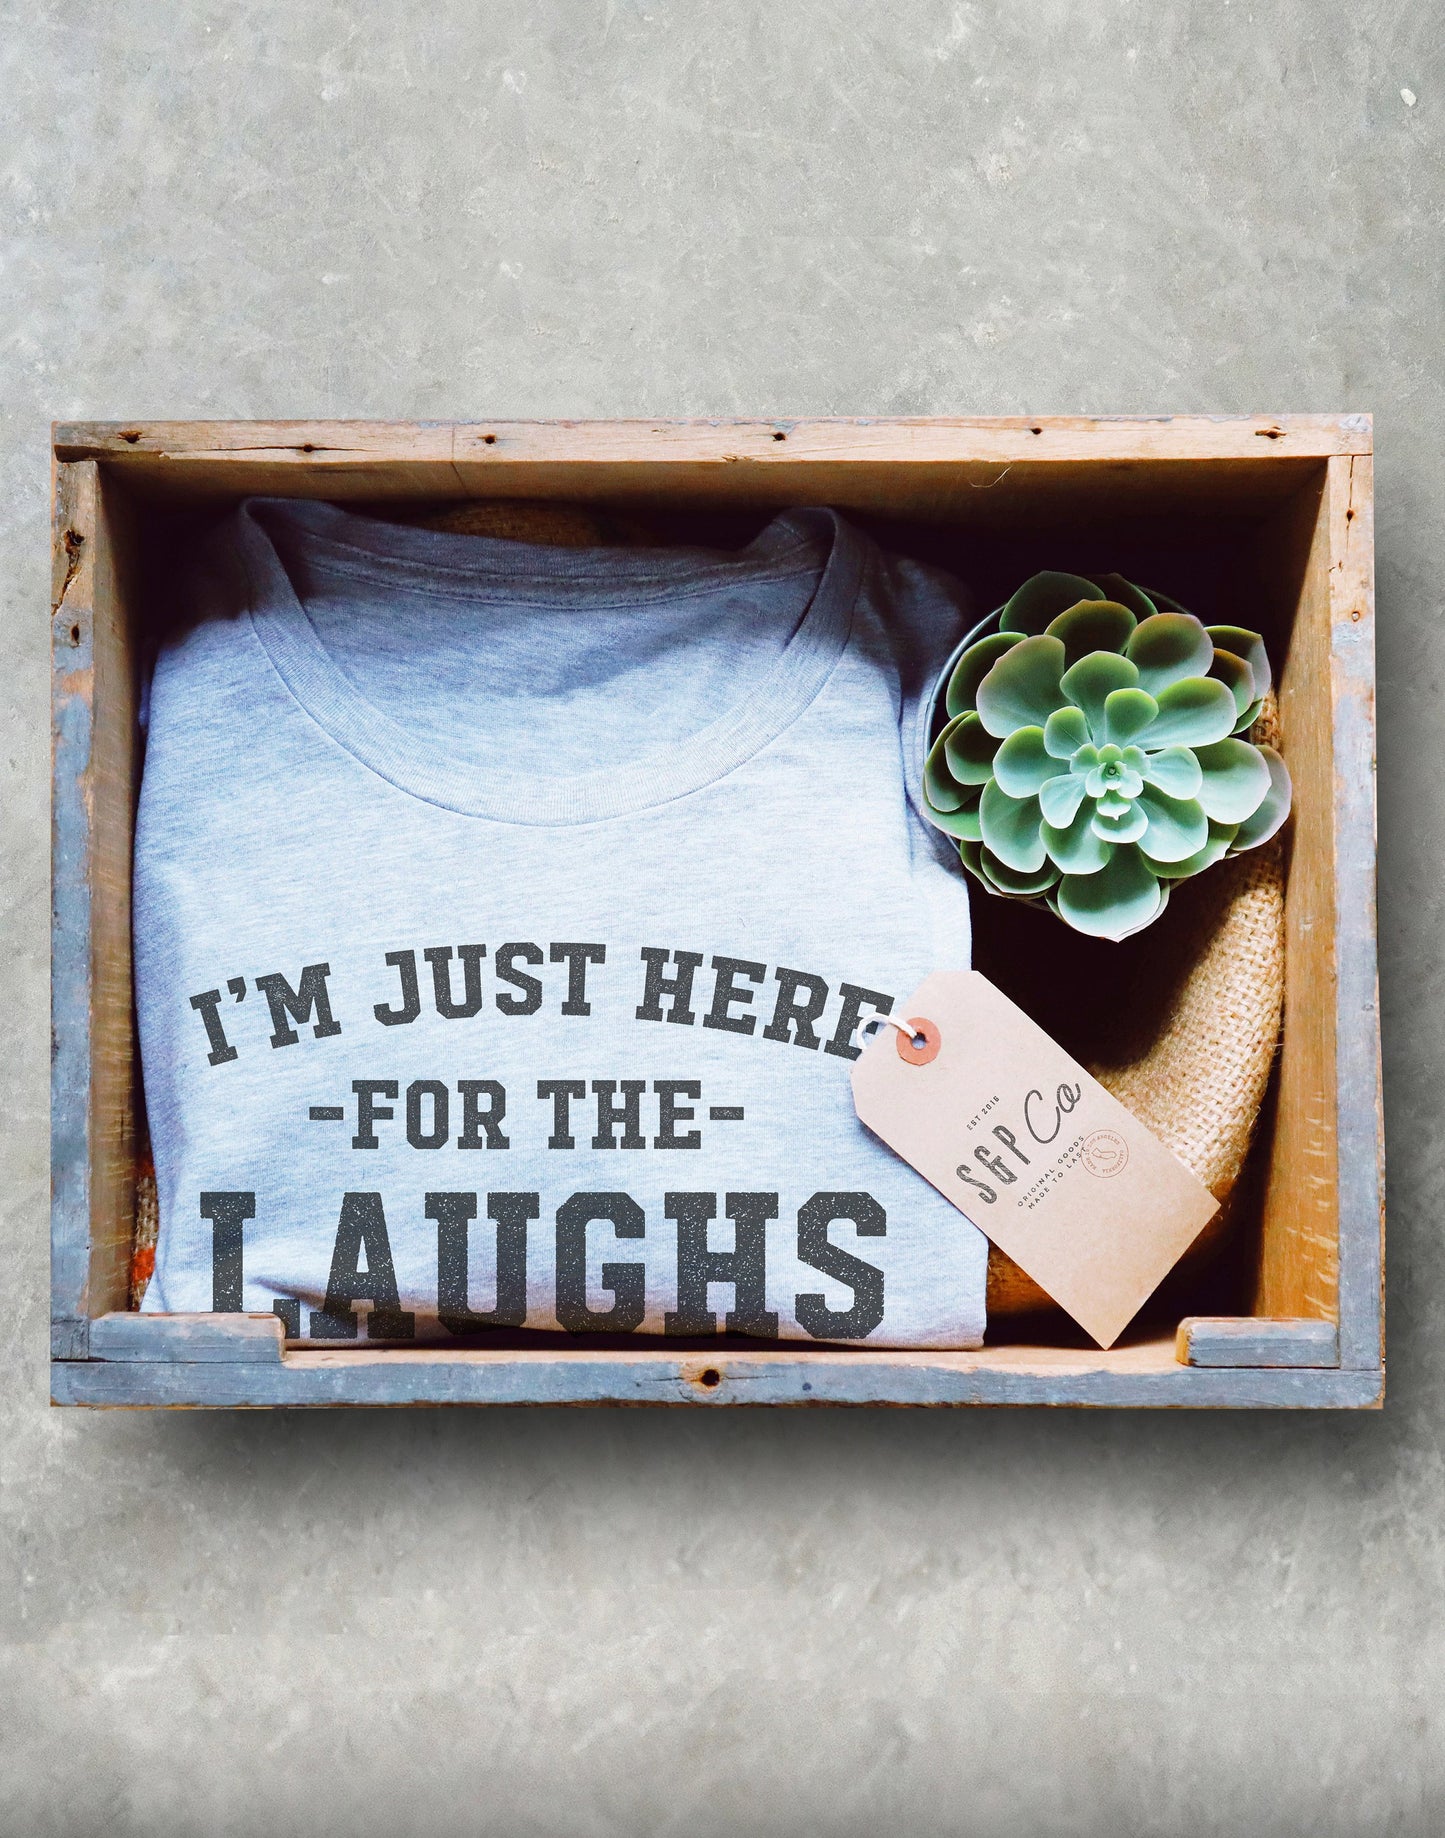 I’m Just Here For The Laughs Unisex Shirt - Comedian Gift, Comic Shirt, Stand Up Comedy Tee, Joker T-Shirt, Laughing Shirt, Laid Back Gift